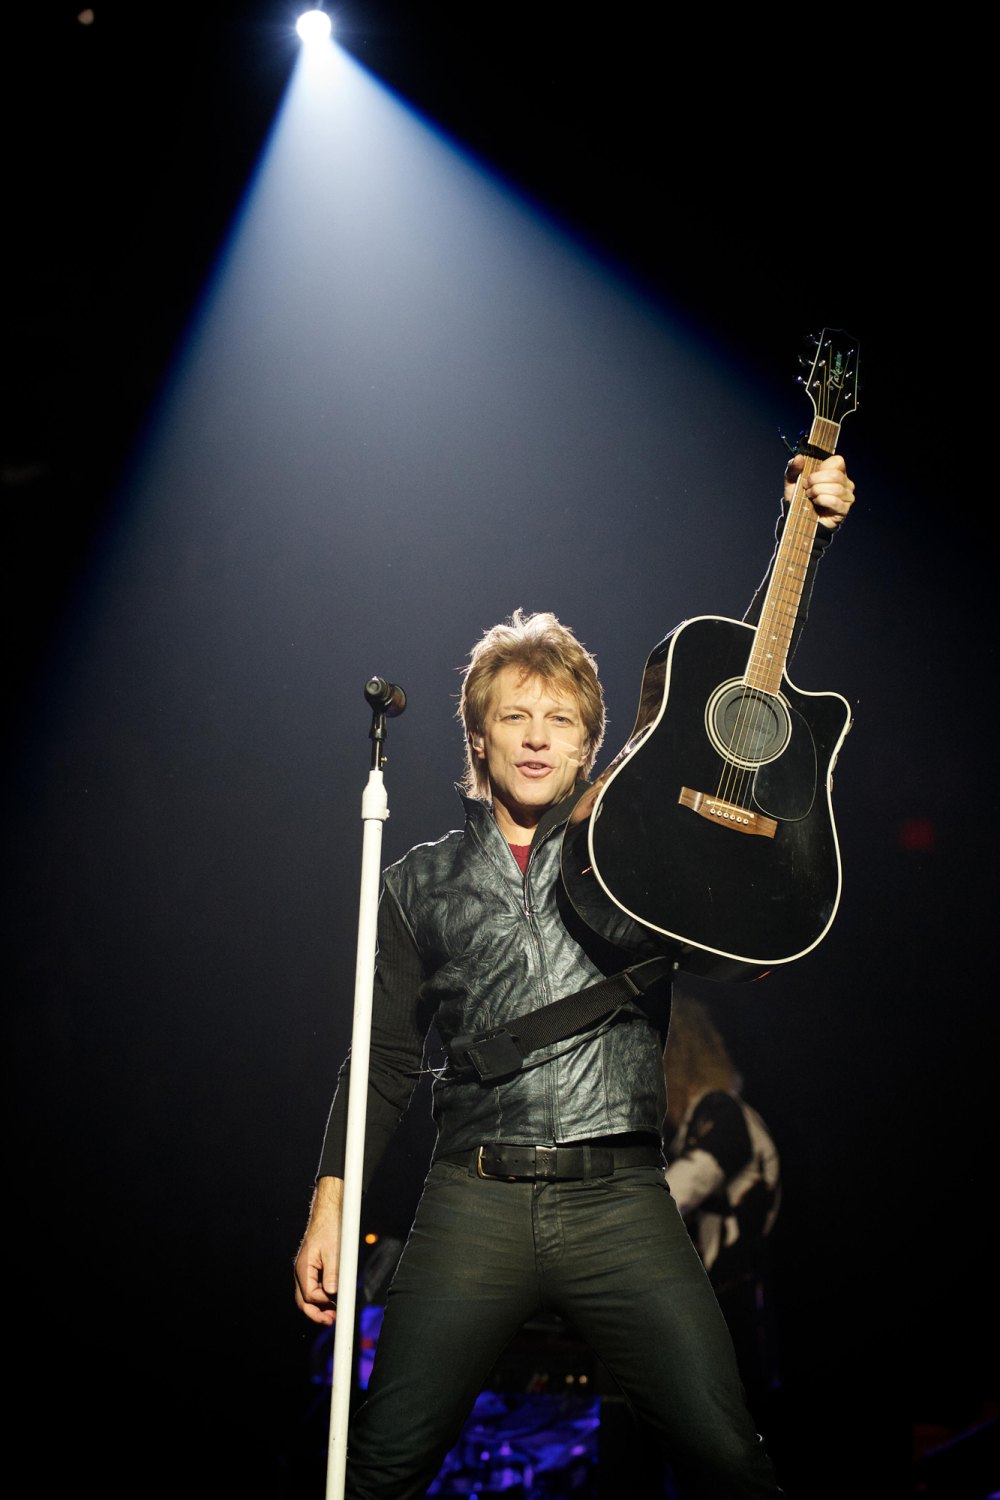 Jon Bon Jovi talks about how being from New Jersey shaped his identity